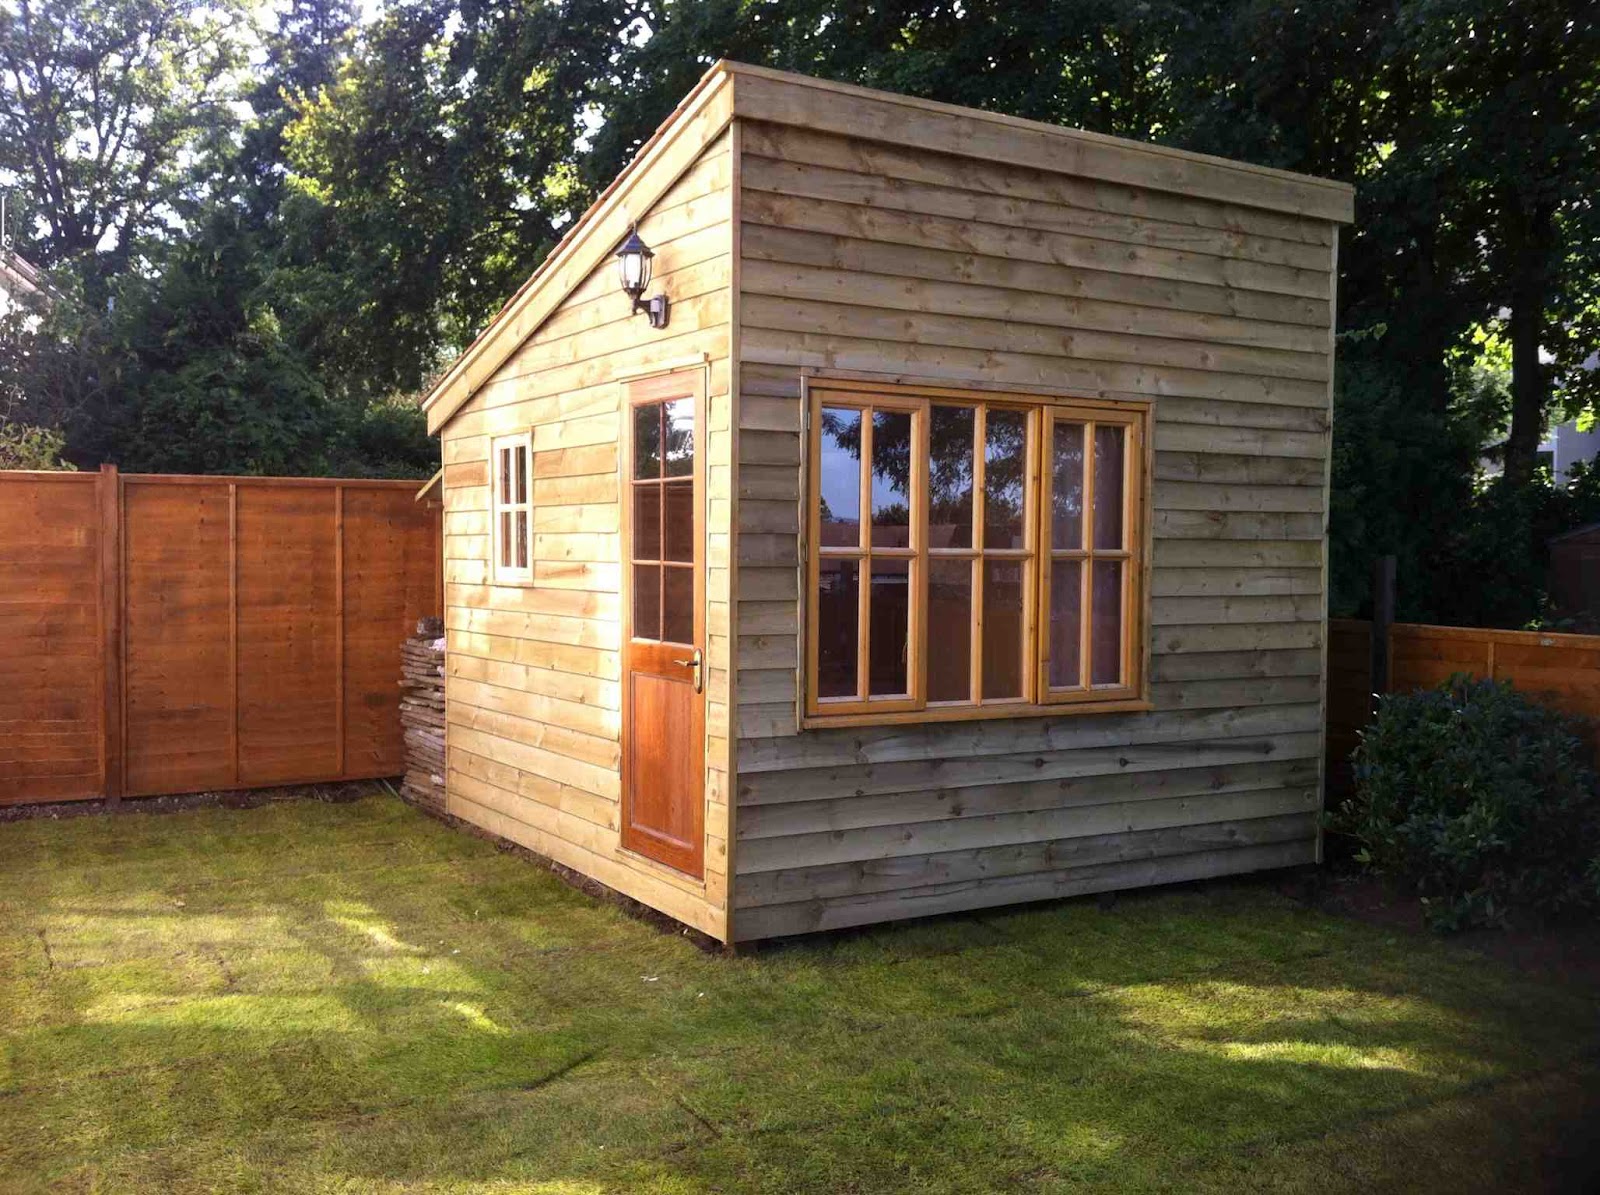 Shedworking: Building a garden office: before and after